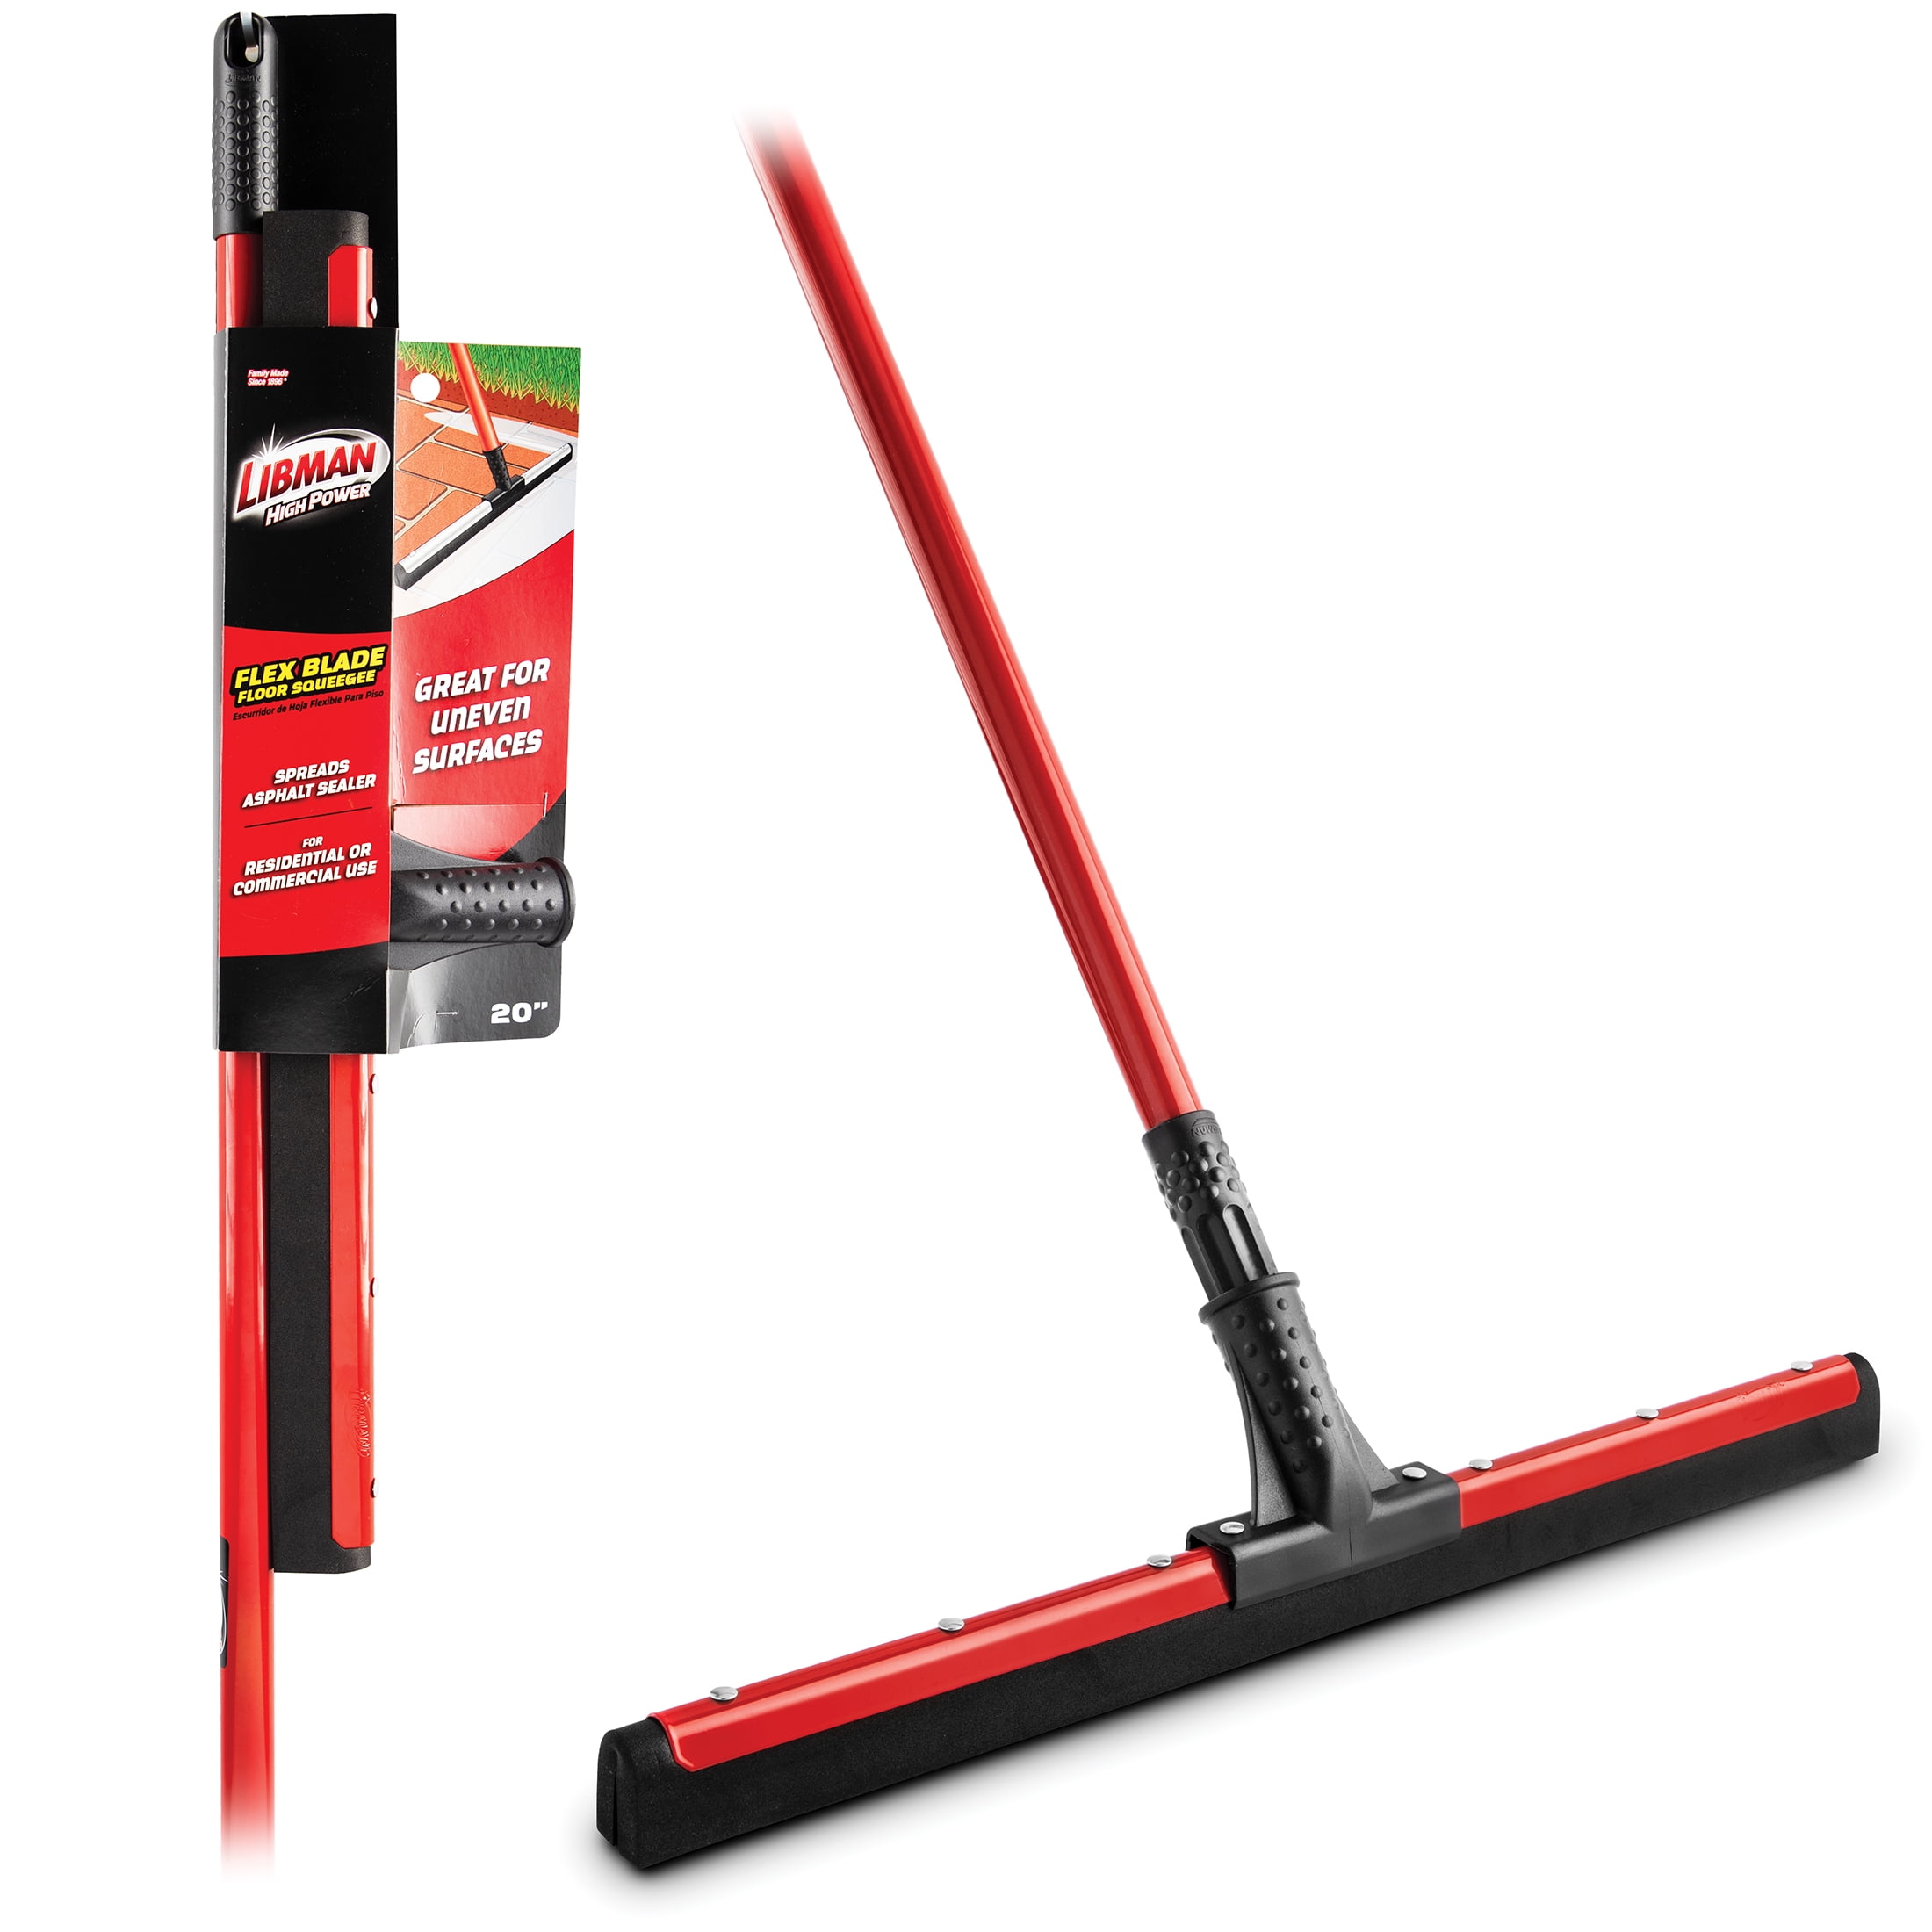 Squeegees for cleaning windows